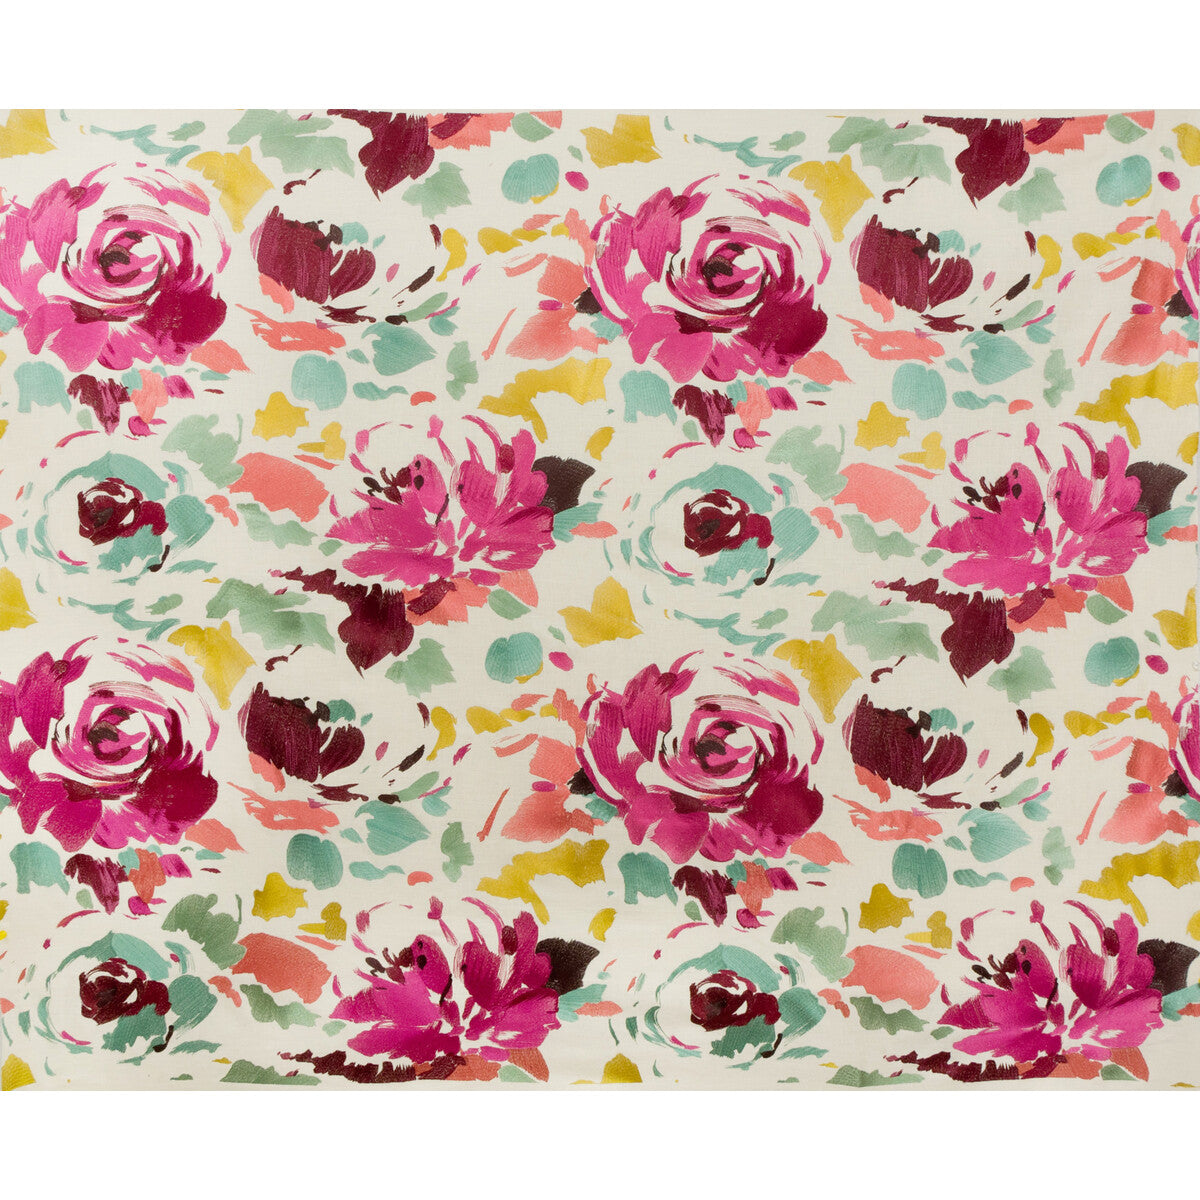 Kalos Emb fabric in pink/sage color - pattern GWF-3301.723.0 - by Lee Jofa Modern in the Kaleidoscope collection